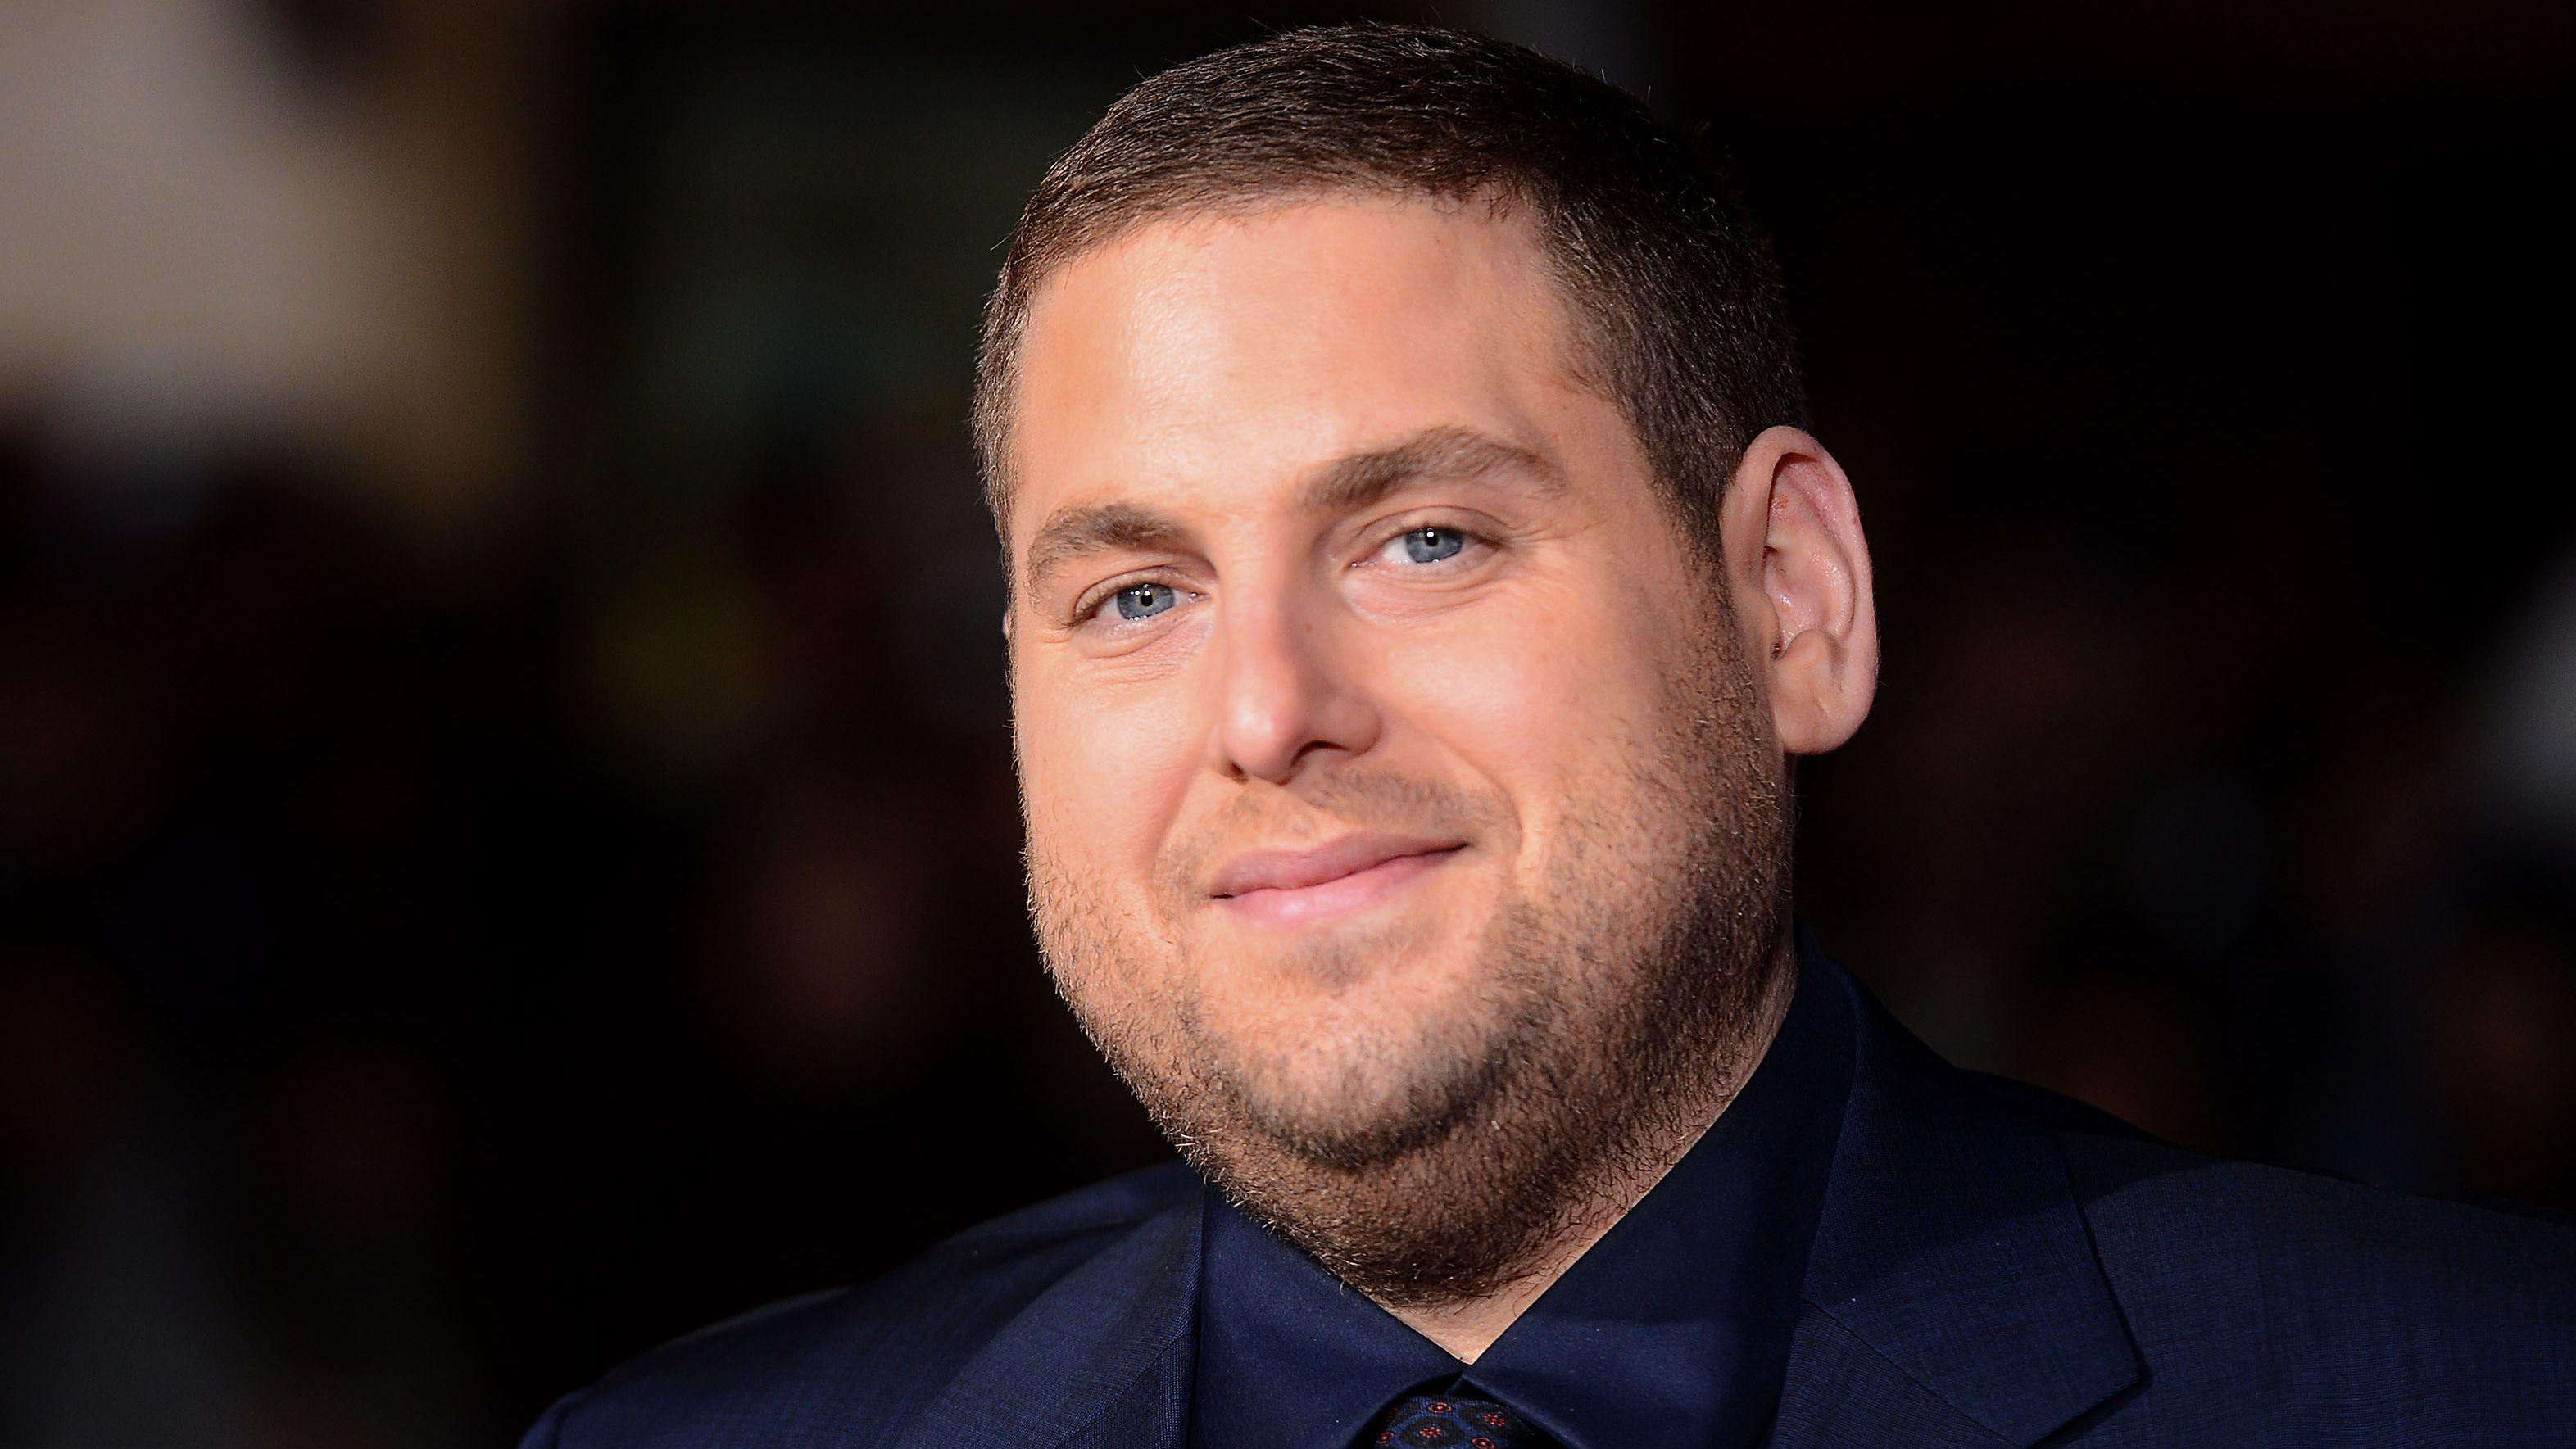 Jonah Hill to Make Directorial Debut in His Spec 'Mid '90s'